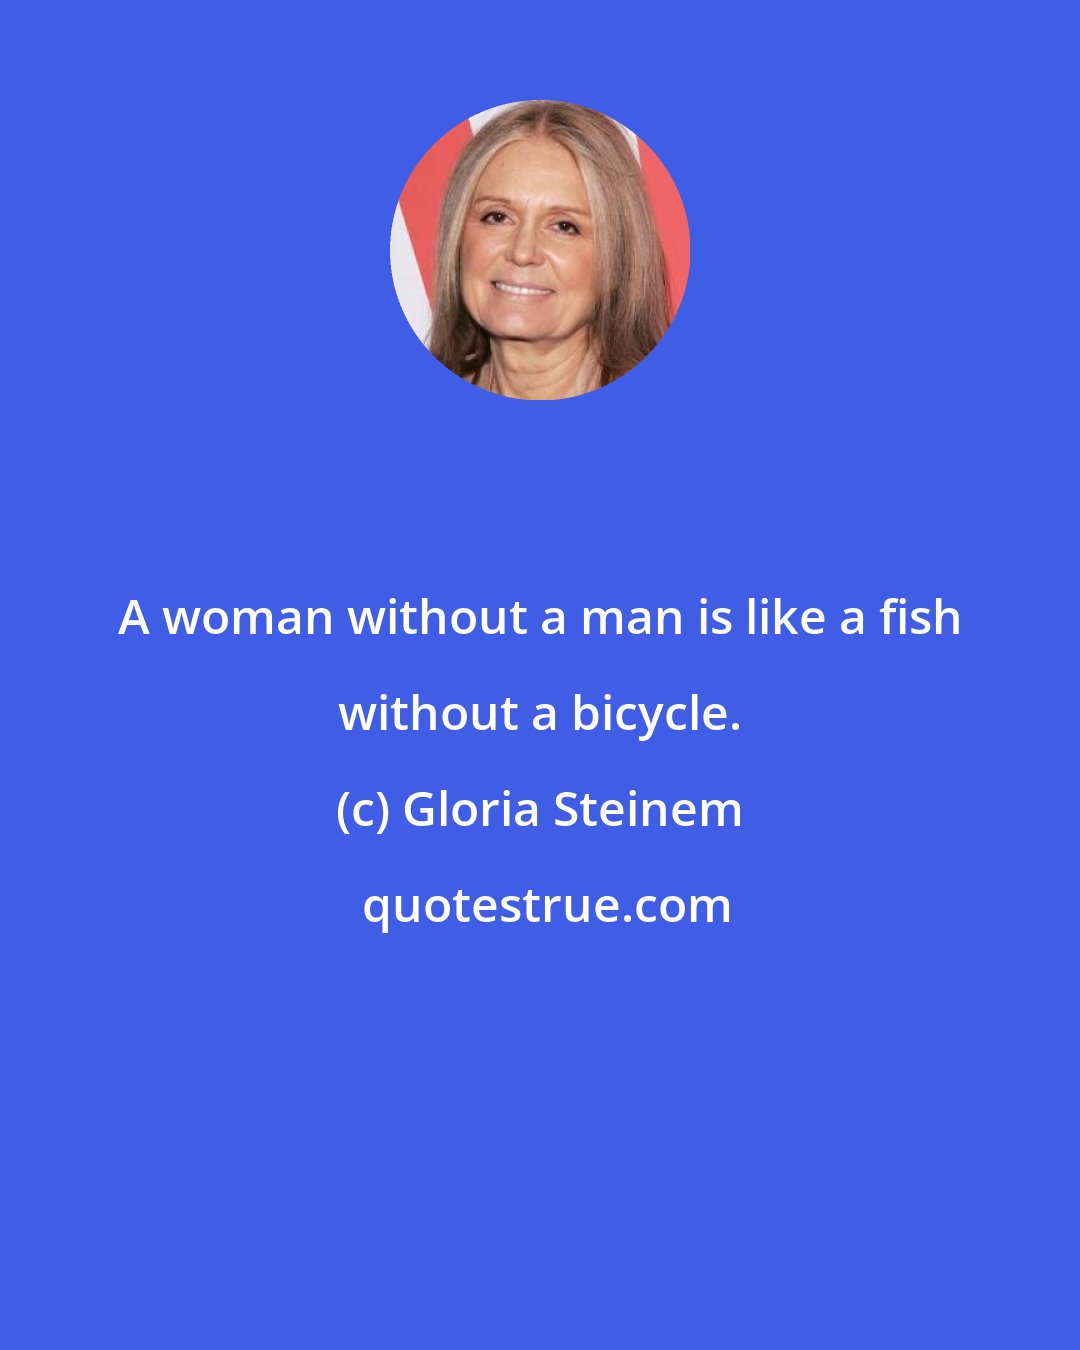 Gloria Steinem: A woman without a man is like a fish without a bicycle.